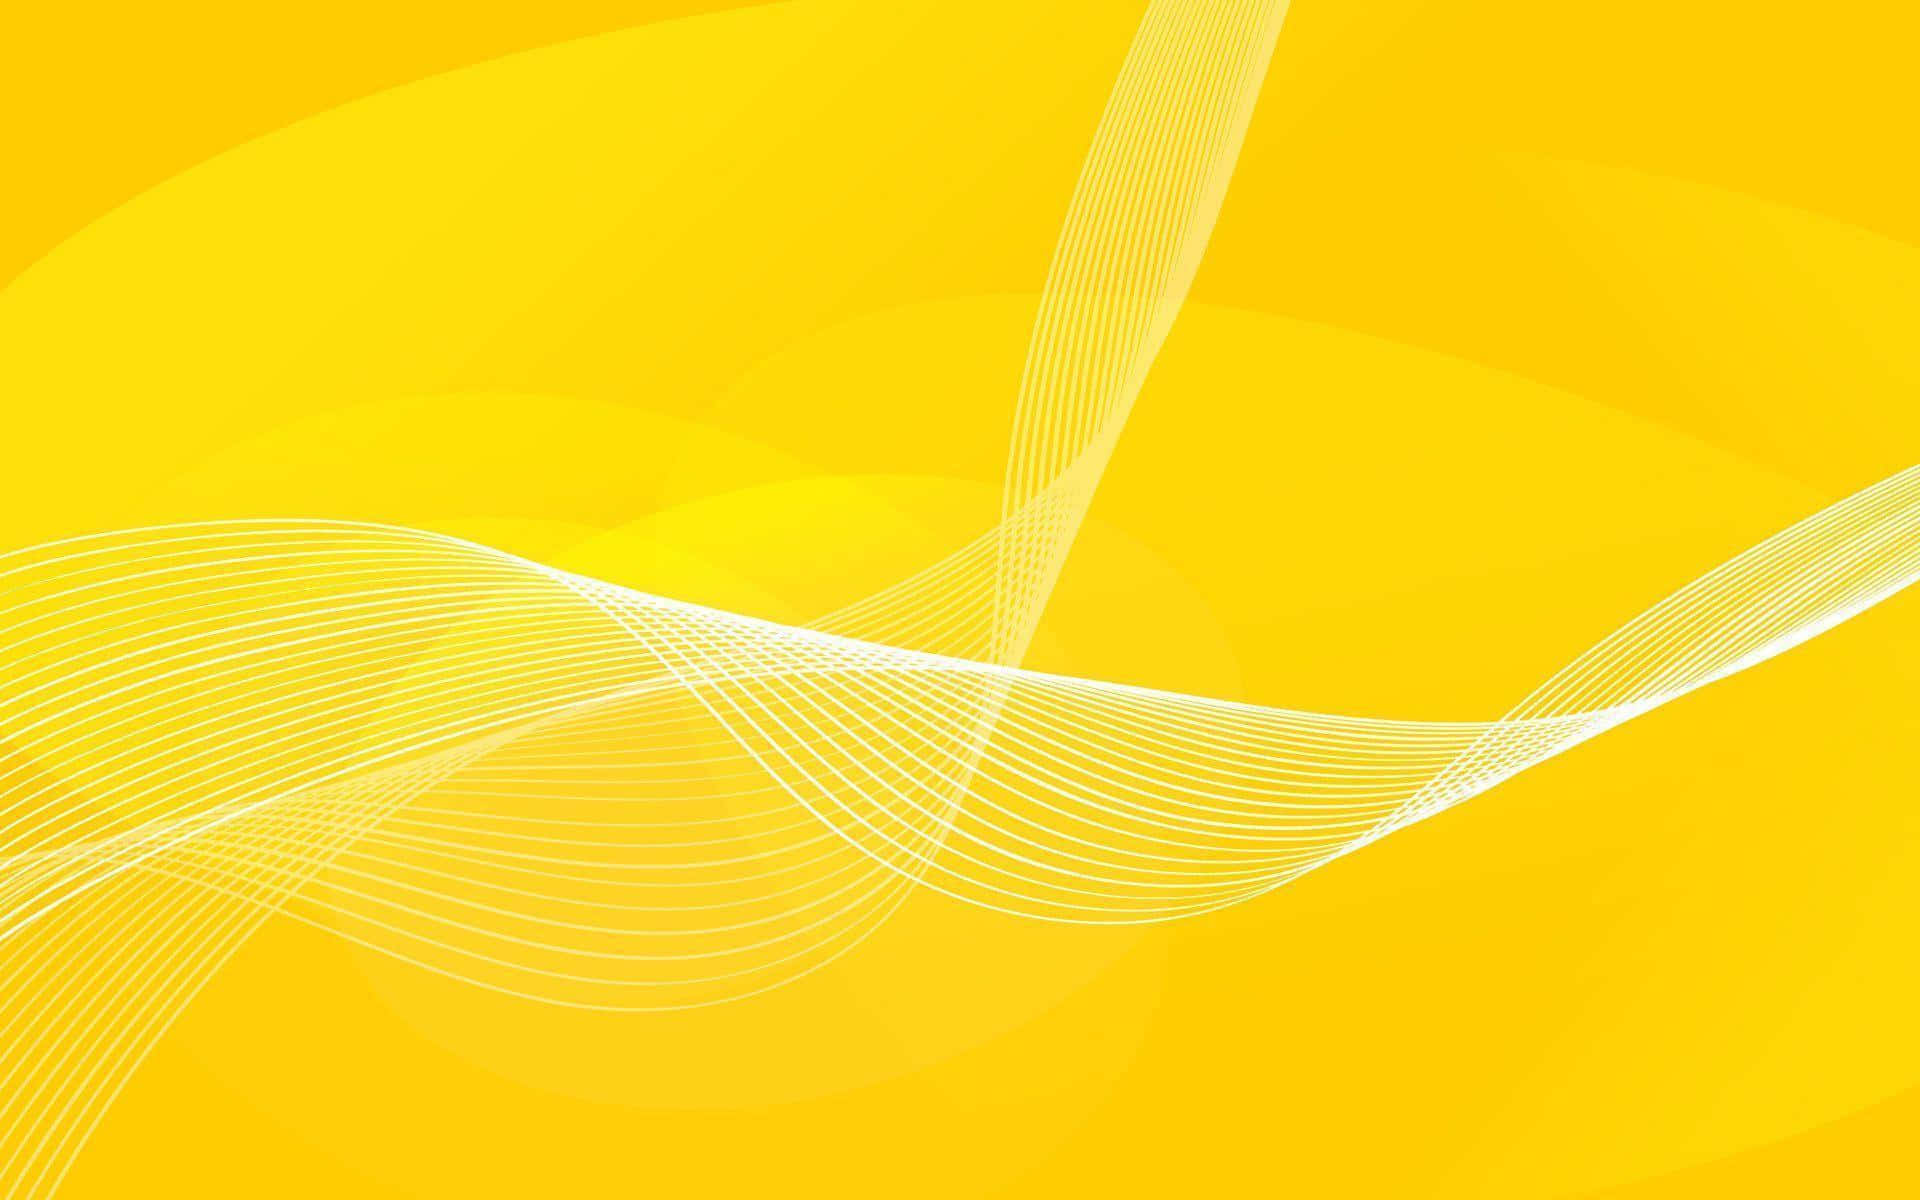 Get Productive on the Bright and Colorful Pastel Yellow Laptop Wallpaper